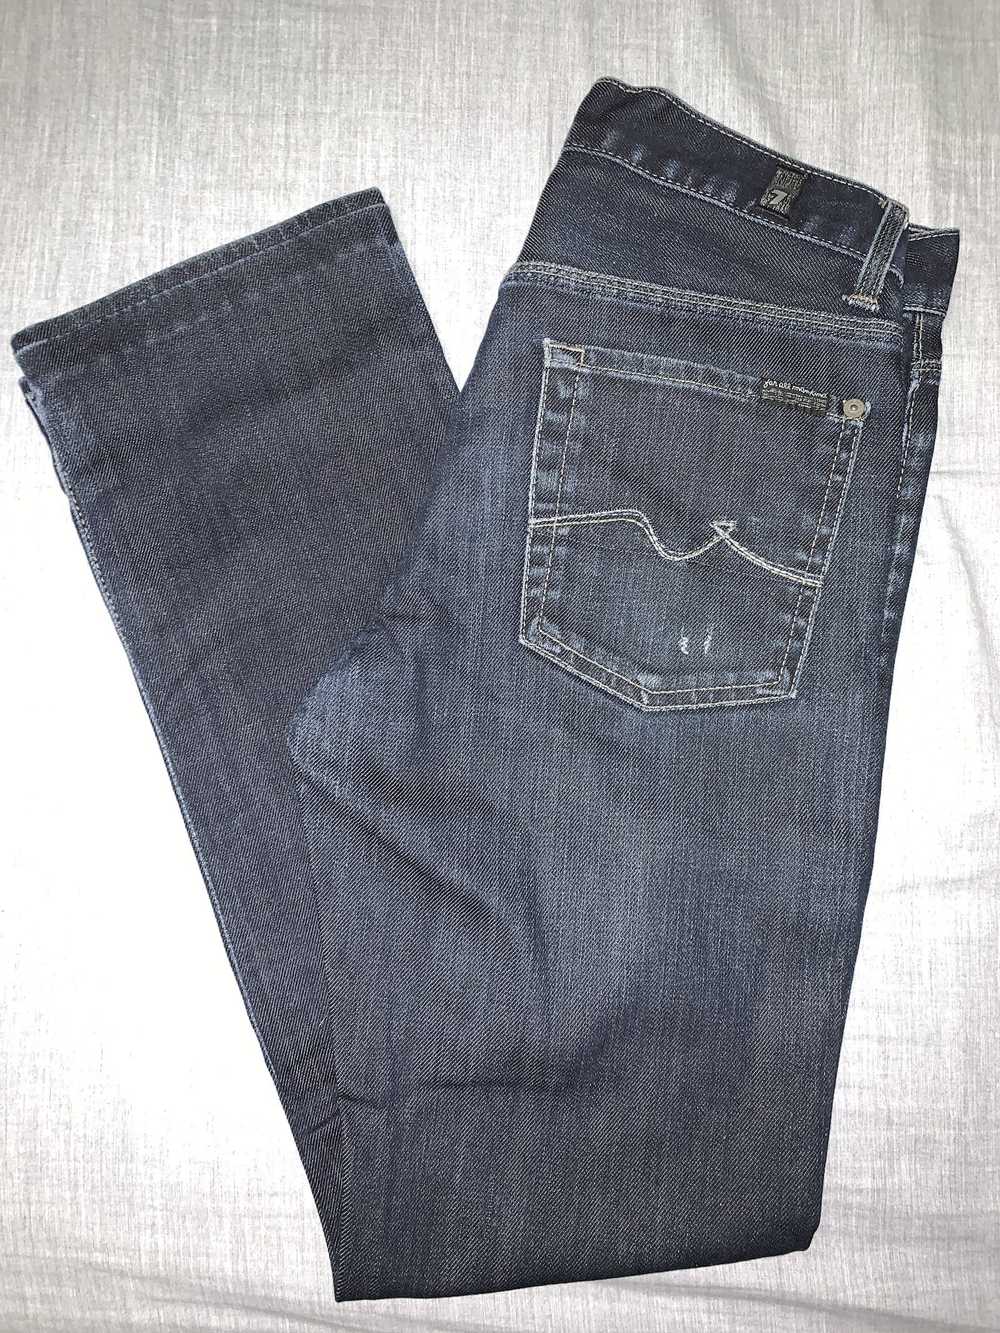 7 For All Mankind 7 for all mankind Slimmy Jeans - image 1